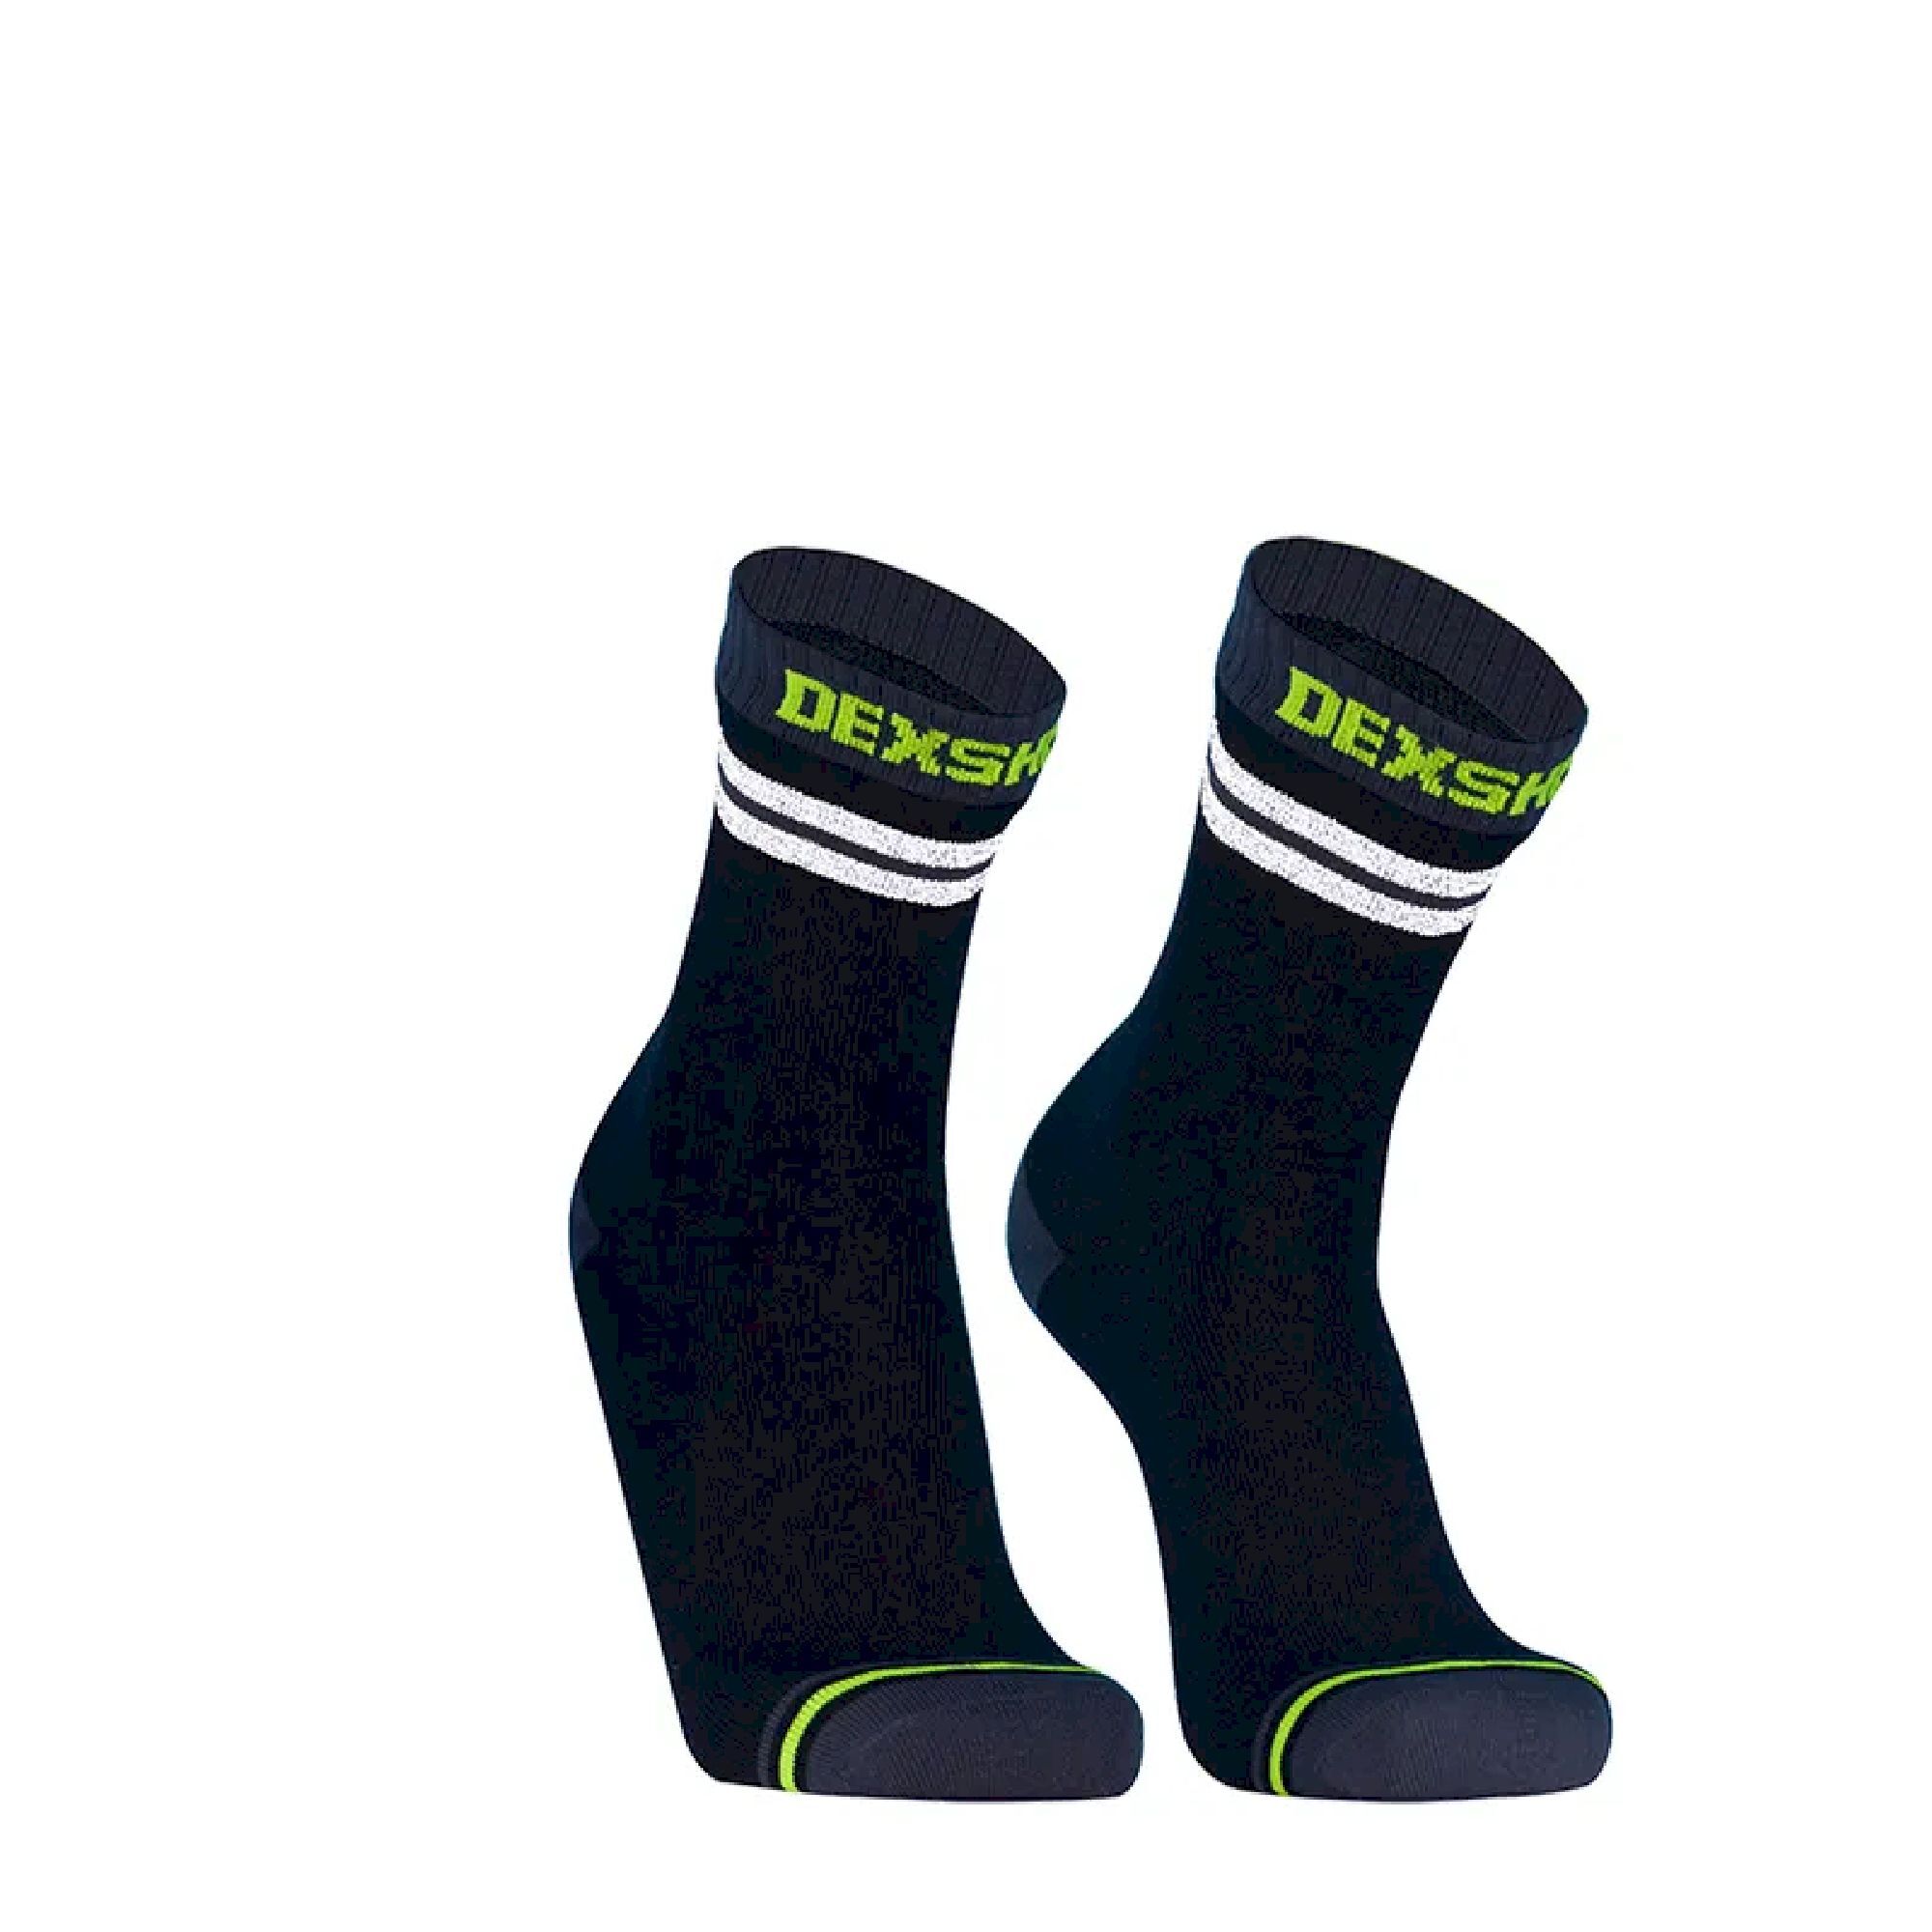 DexShell Pro Visibility Socks - Calcetines impermeables | Hardloop